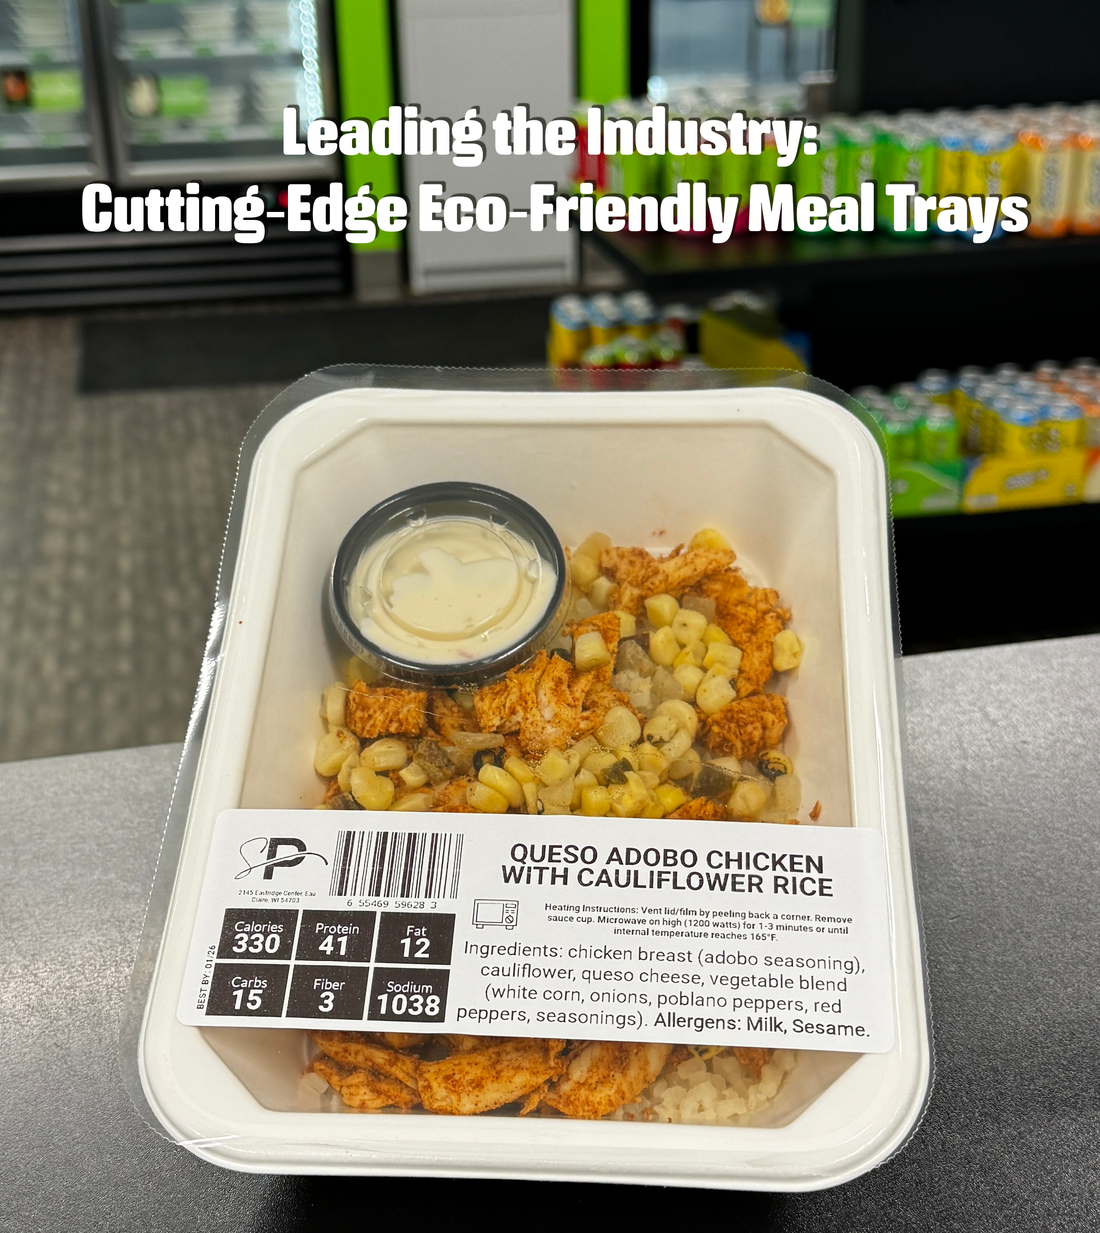 Introducing Our Cutting-Edge Eco-Friendly Meal Trays: Pioneering Sustainability in the Industry